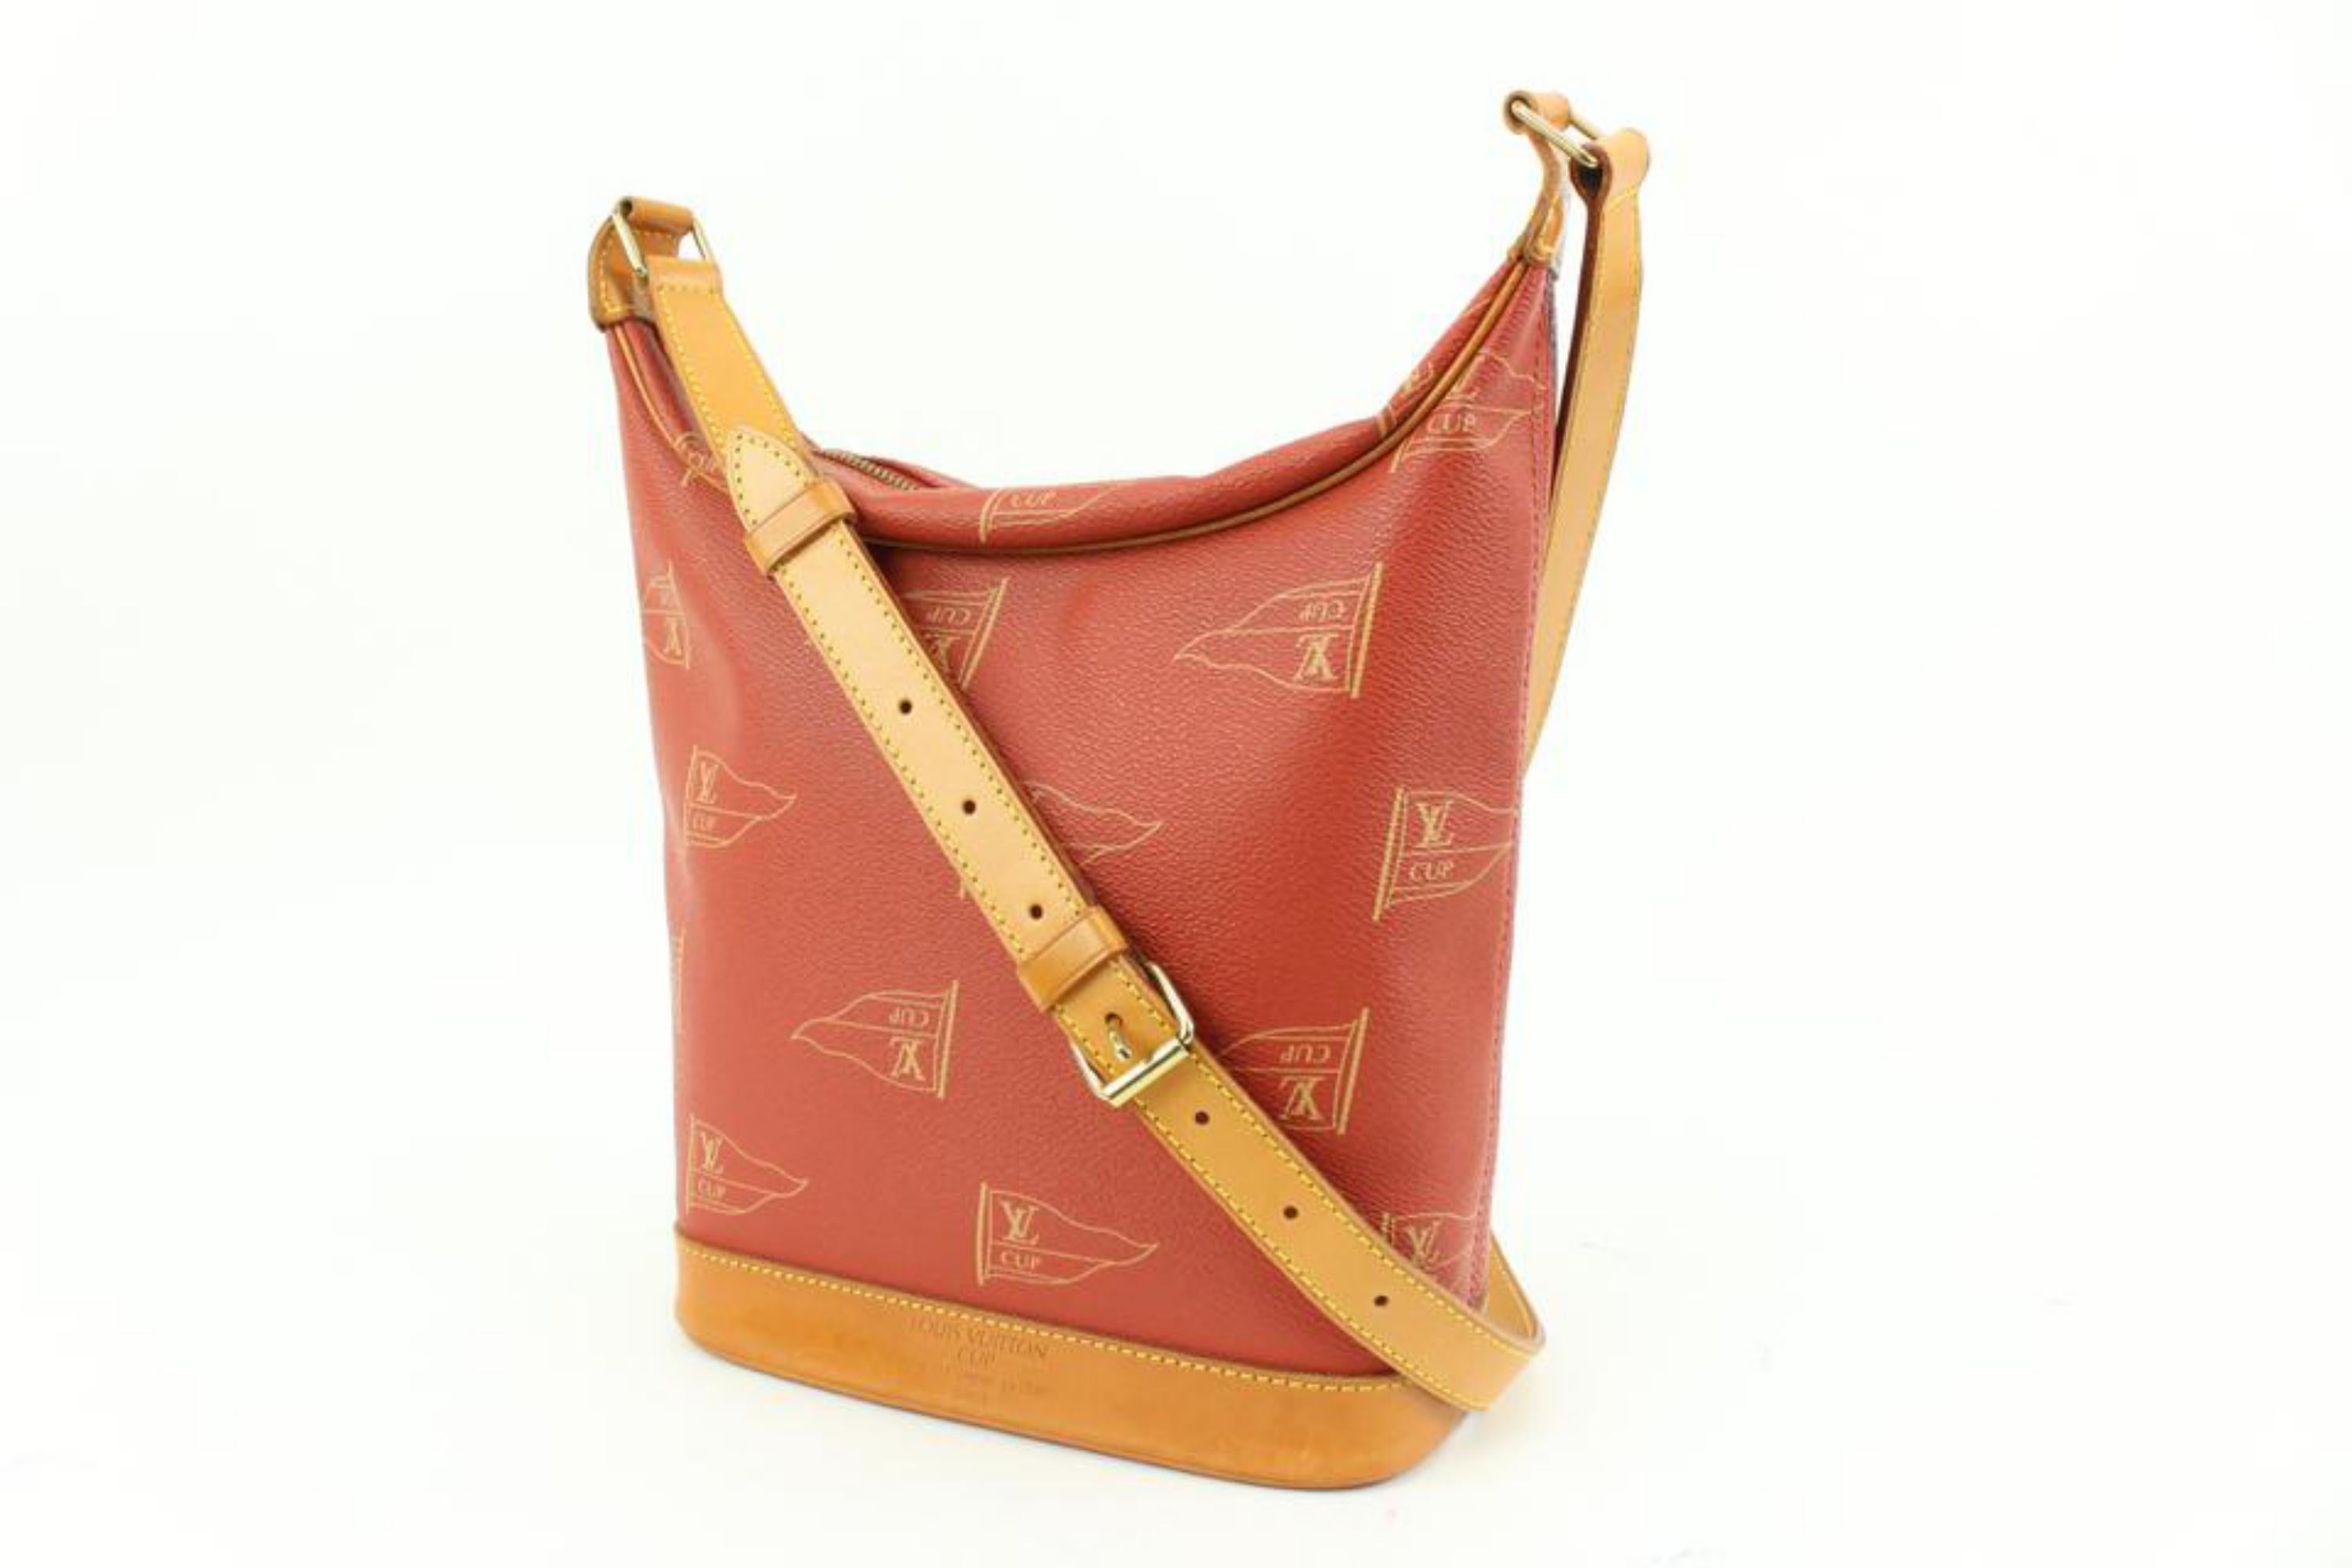 Louis Vuitton 1994 LV Cup Red Le Touquet Hobo Shoulder Bag 75lk39s
Date Code/Serial Number: MI1924
Made In: France
Measurements: Length:  11